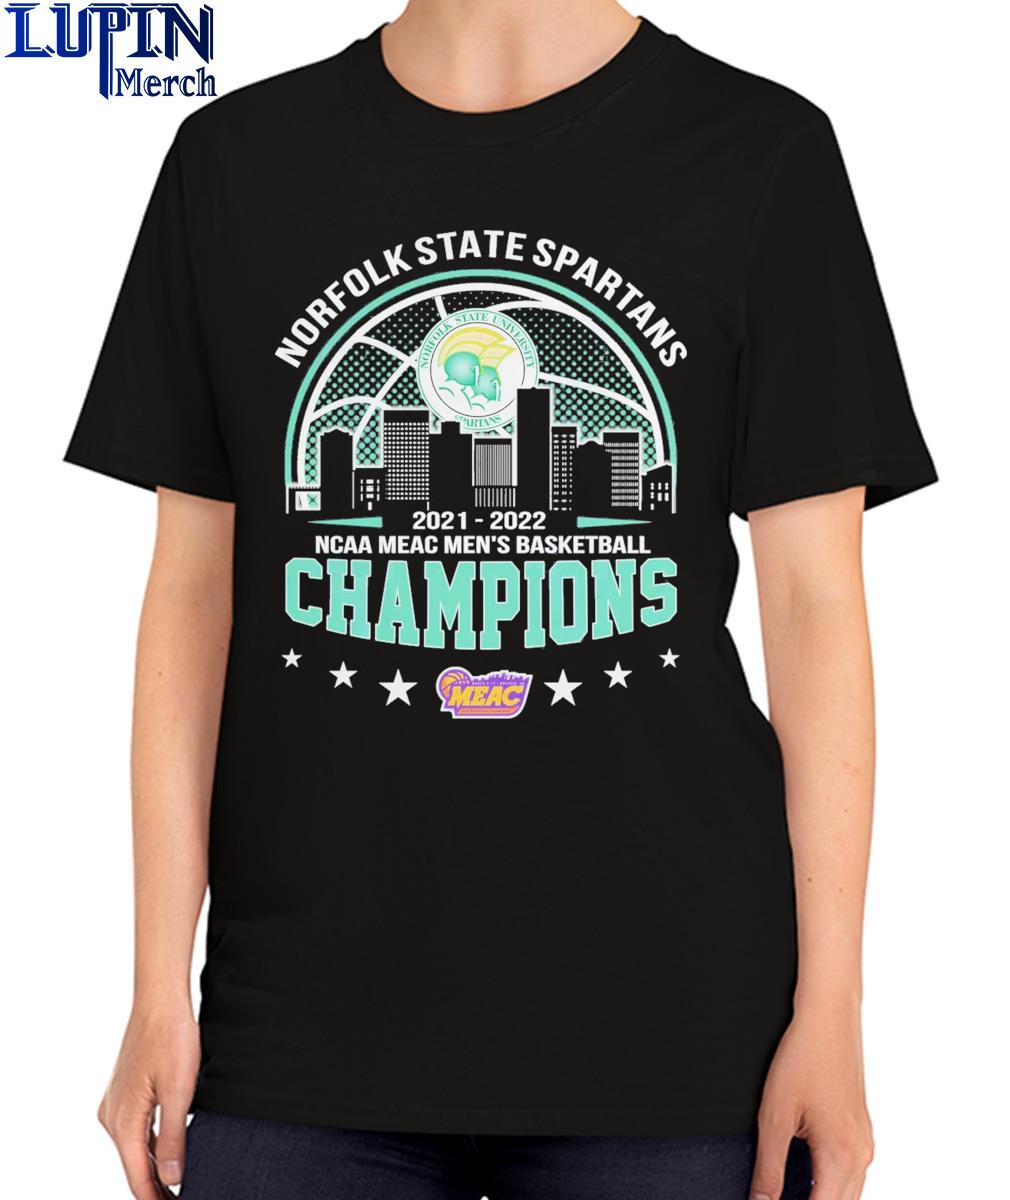 Norfolk State Spartans 2021-2022 Ncaa Meac Mens Basketball Champions  Classic T-Shirt - REVER LAVIE